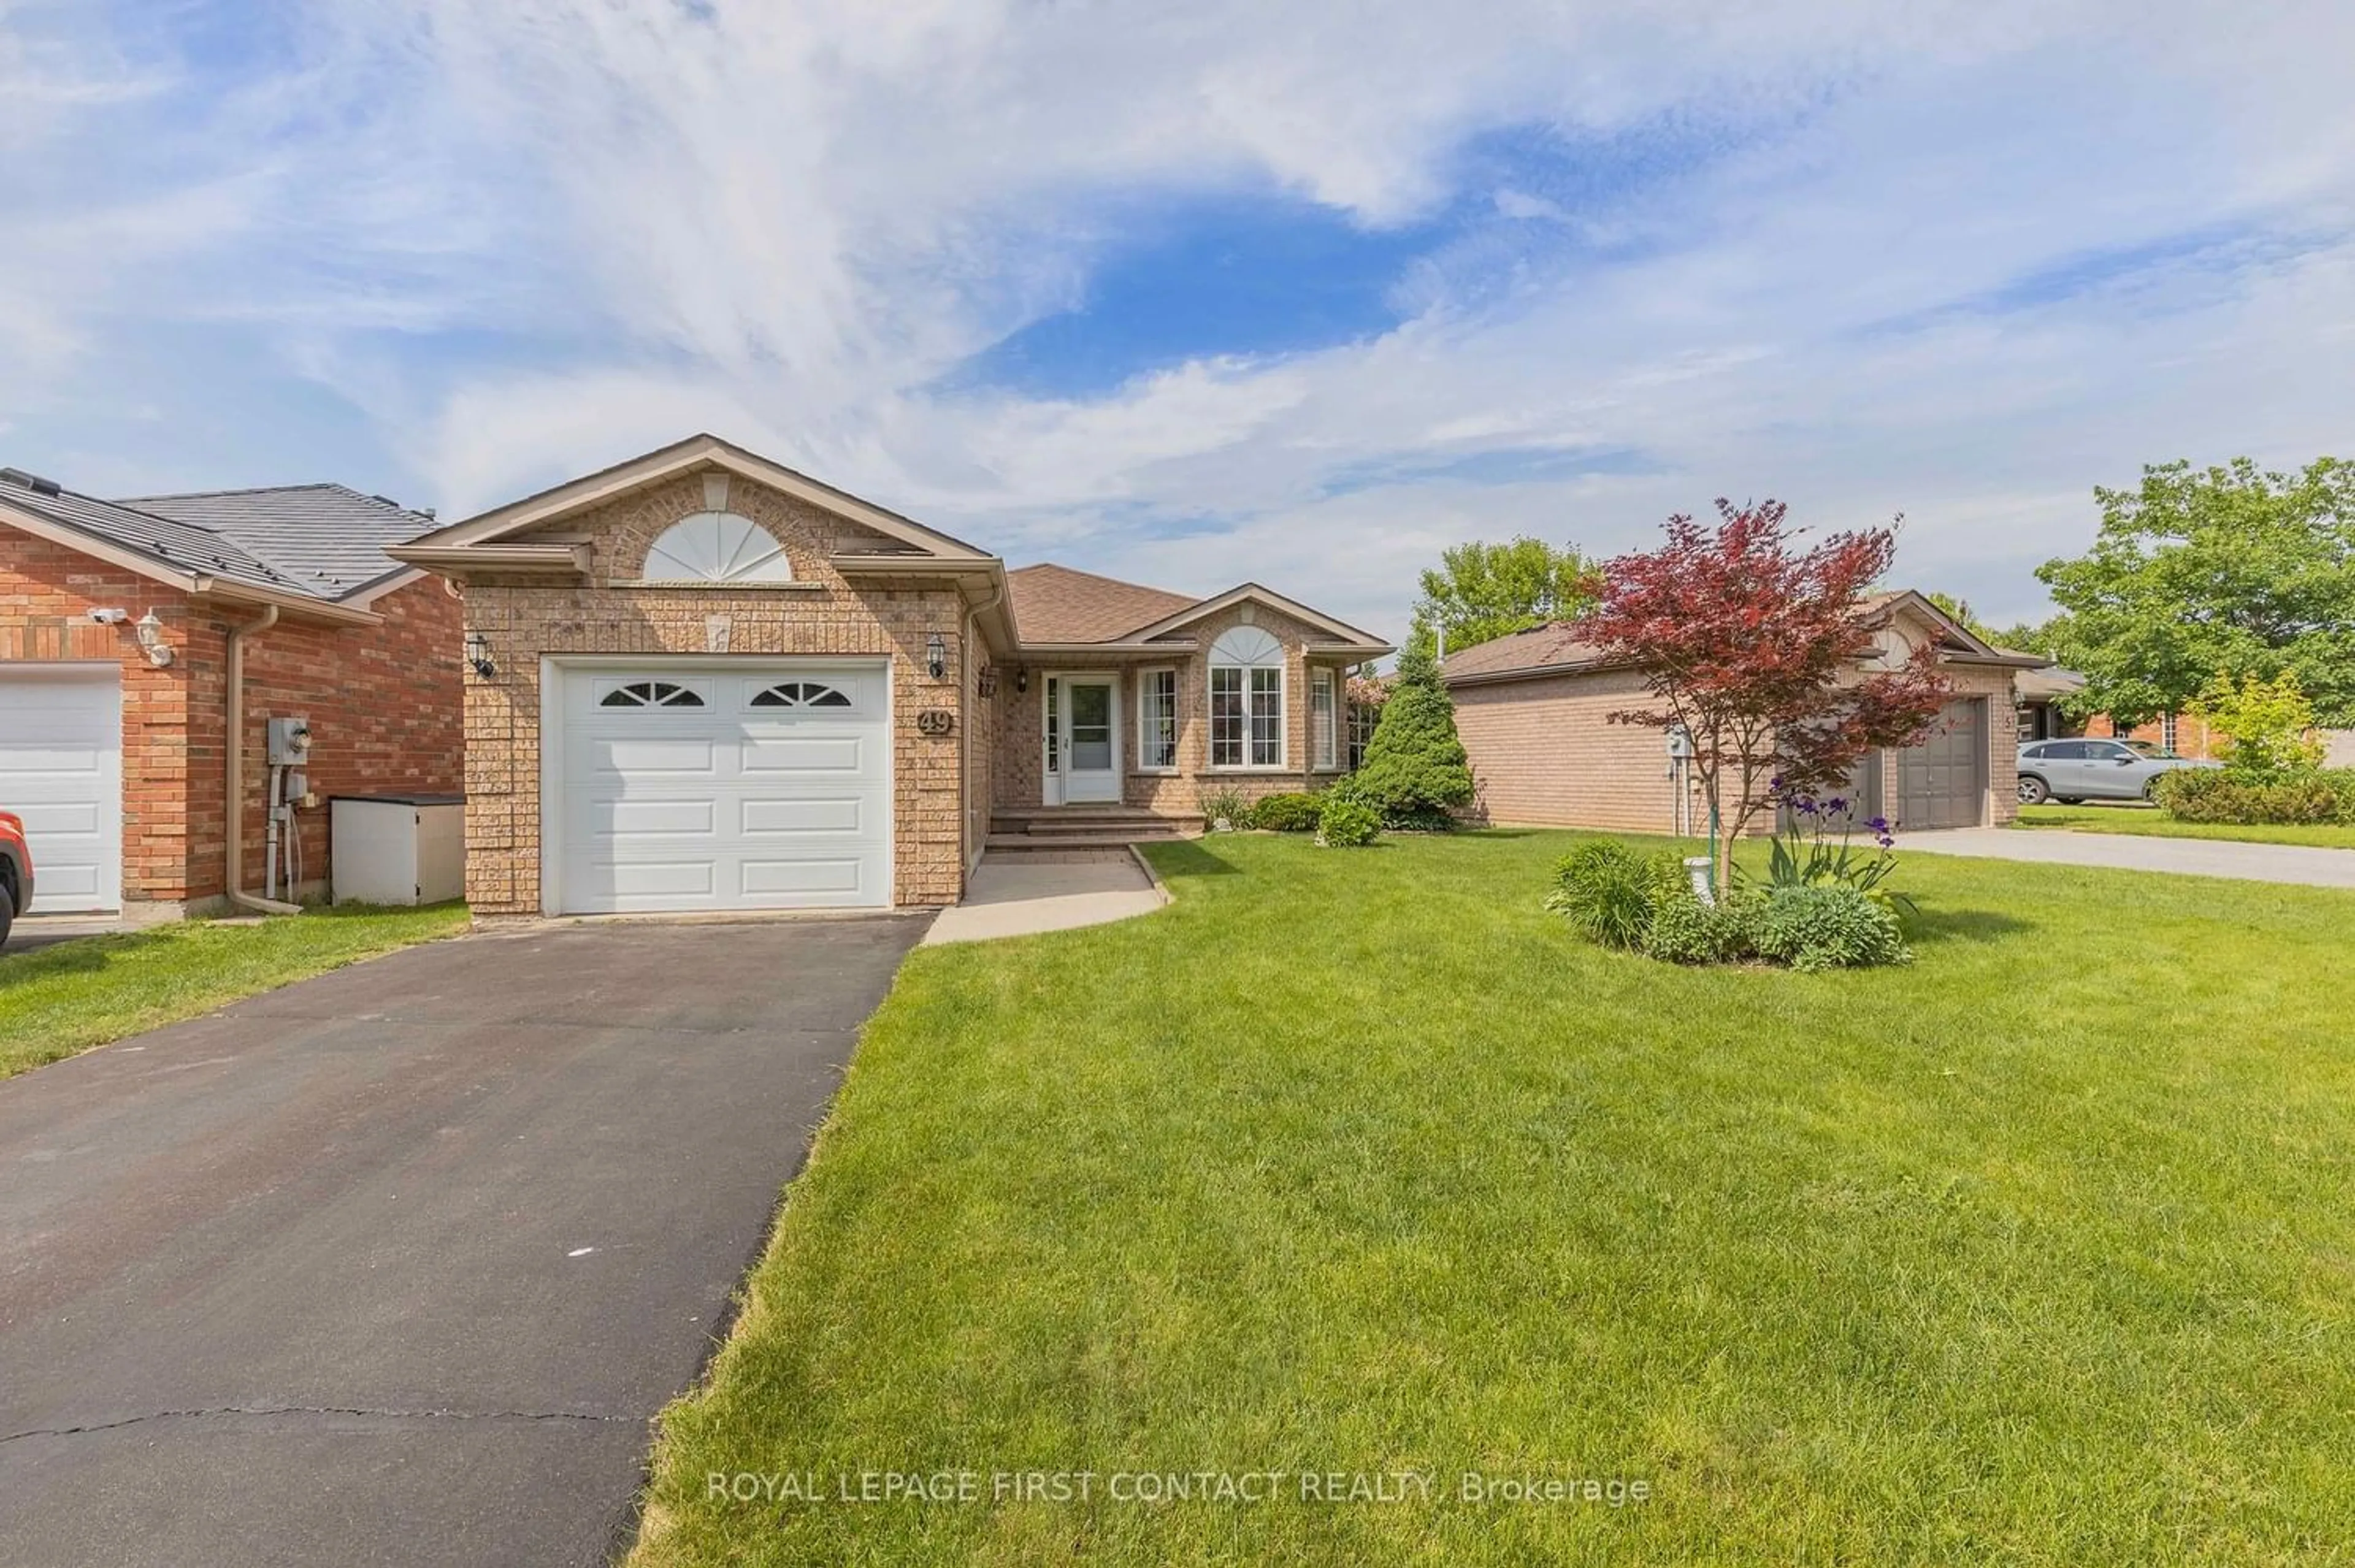 Frontside or backside of a home for 49 Wallwins Way, Barrie Ontario L4N 8M2